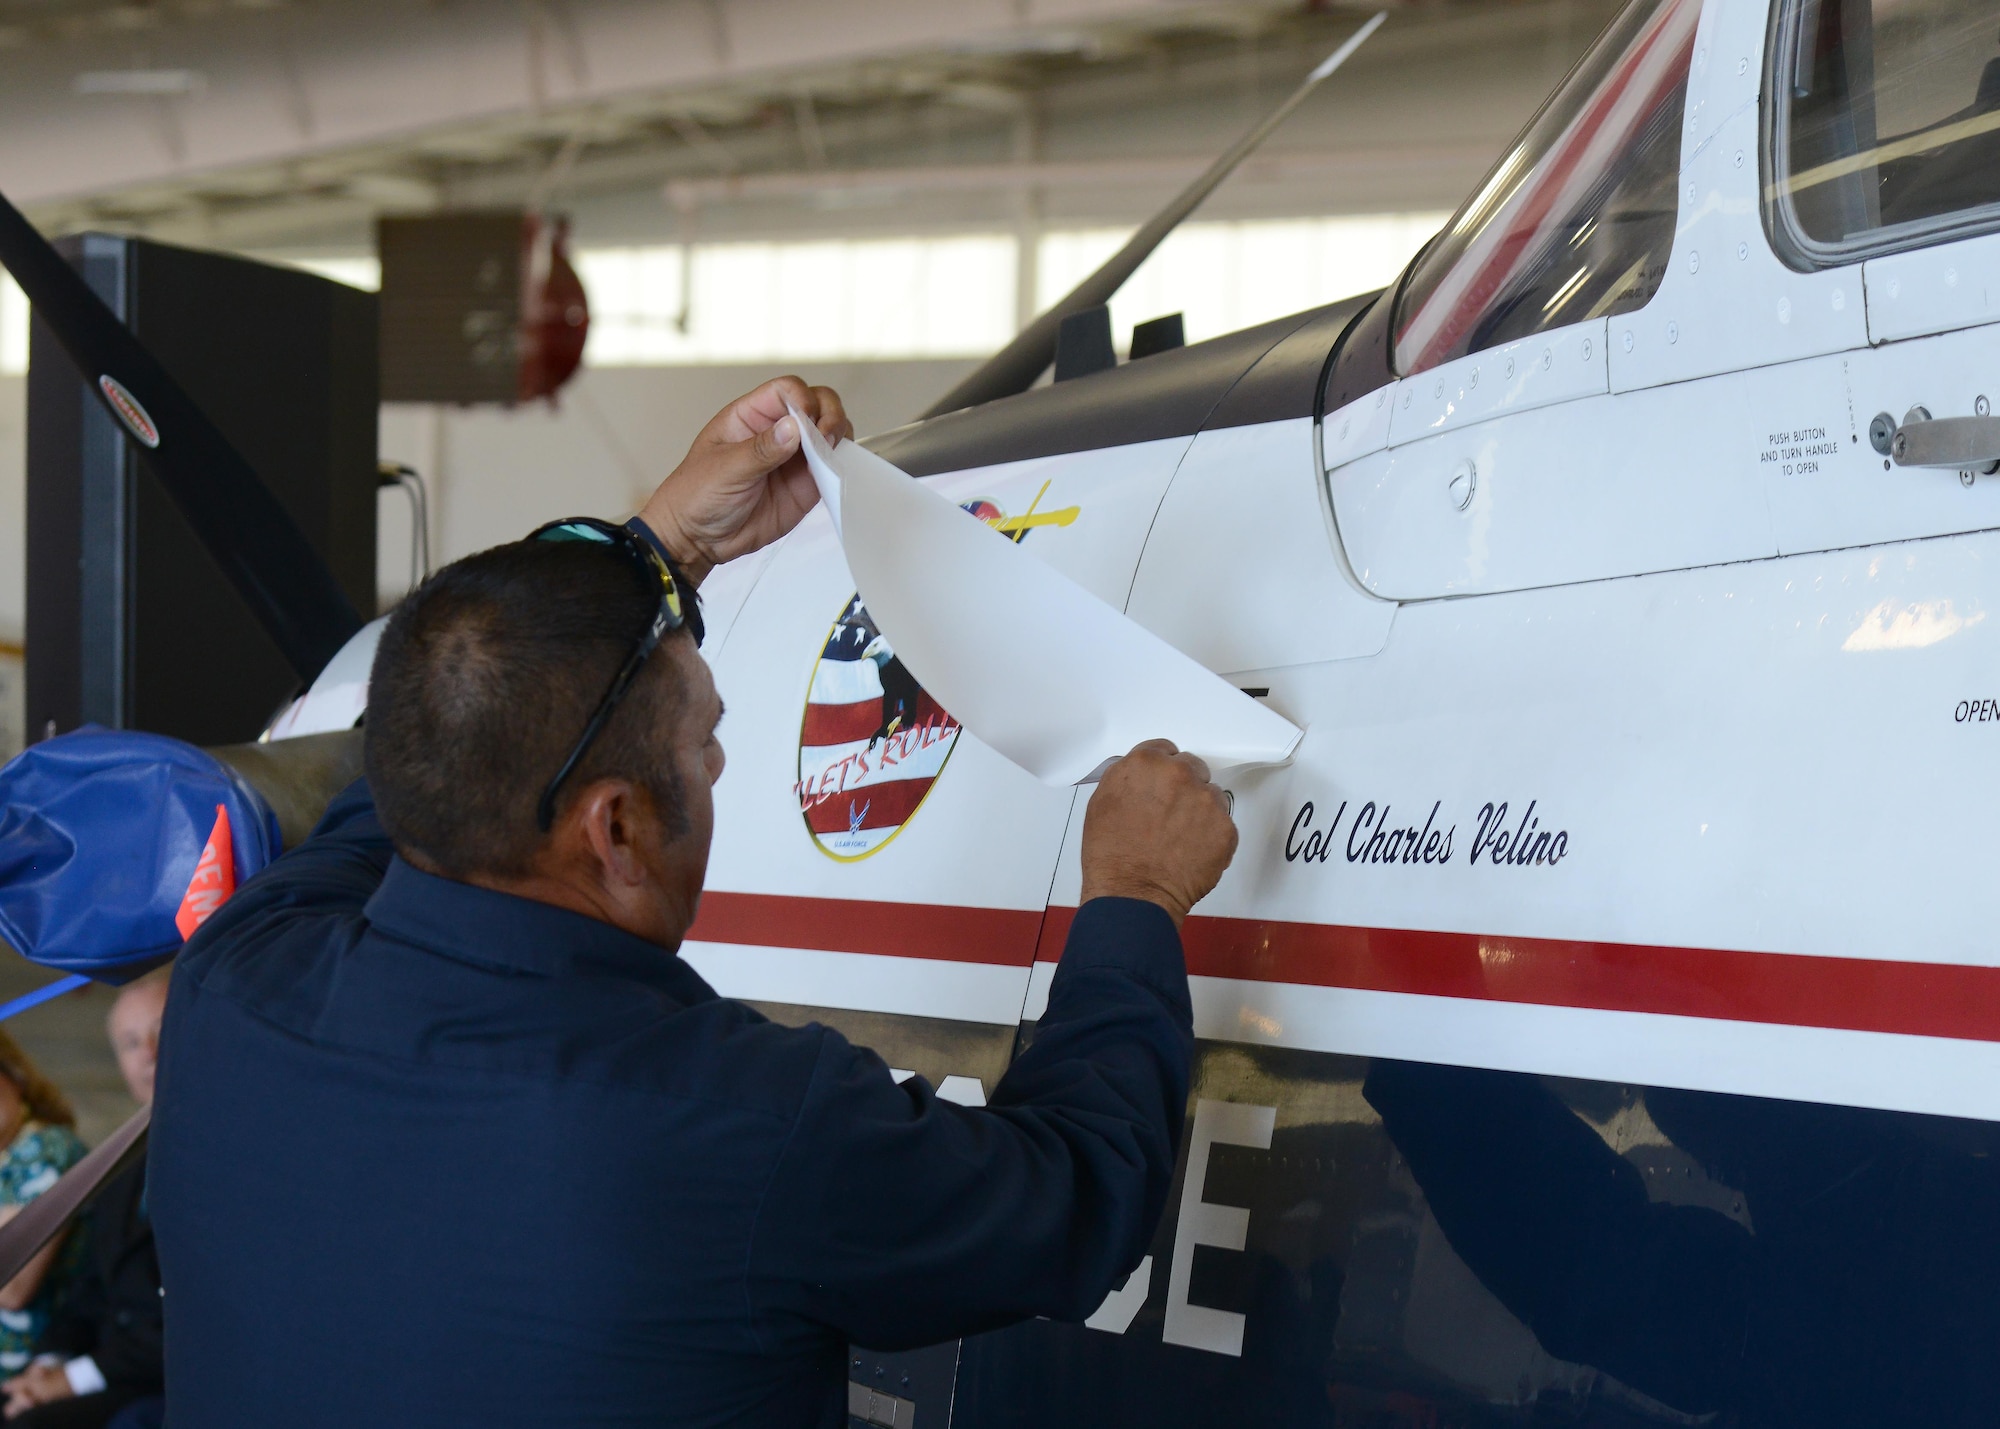 Newly appointed commander of the 47th Flying Training Wing, U.S. Air Force Col. Charles Velino, has his name revealed on the side of a T-6 Texan II during the wing’s change of command ceremony at Laughlin Air Force Base, Tx., June 28, 2017.  The T-6 is the wing’s primary training aircraft, which is flown by all undergraduate pilot students.